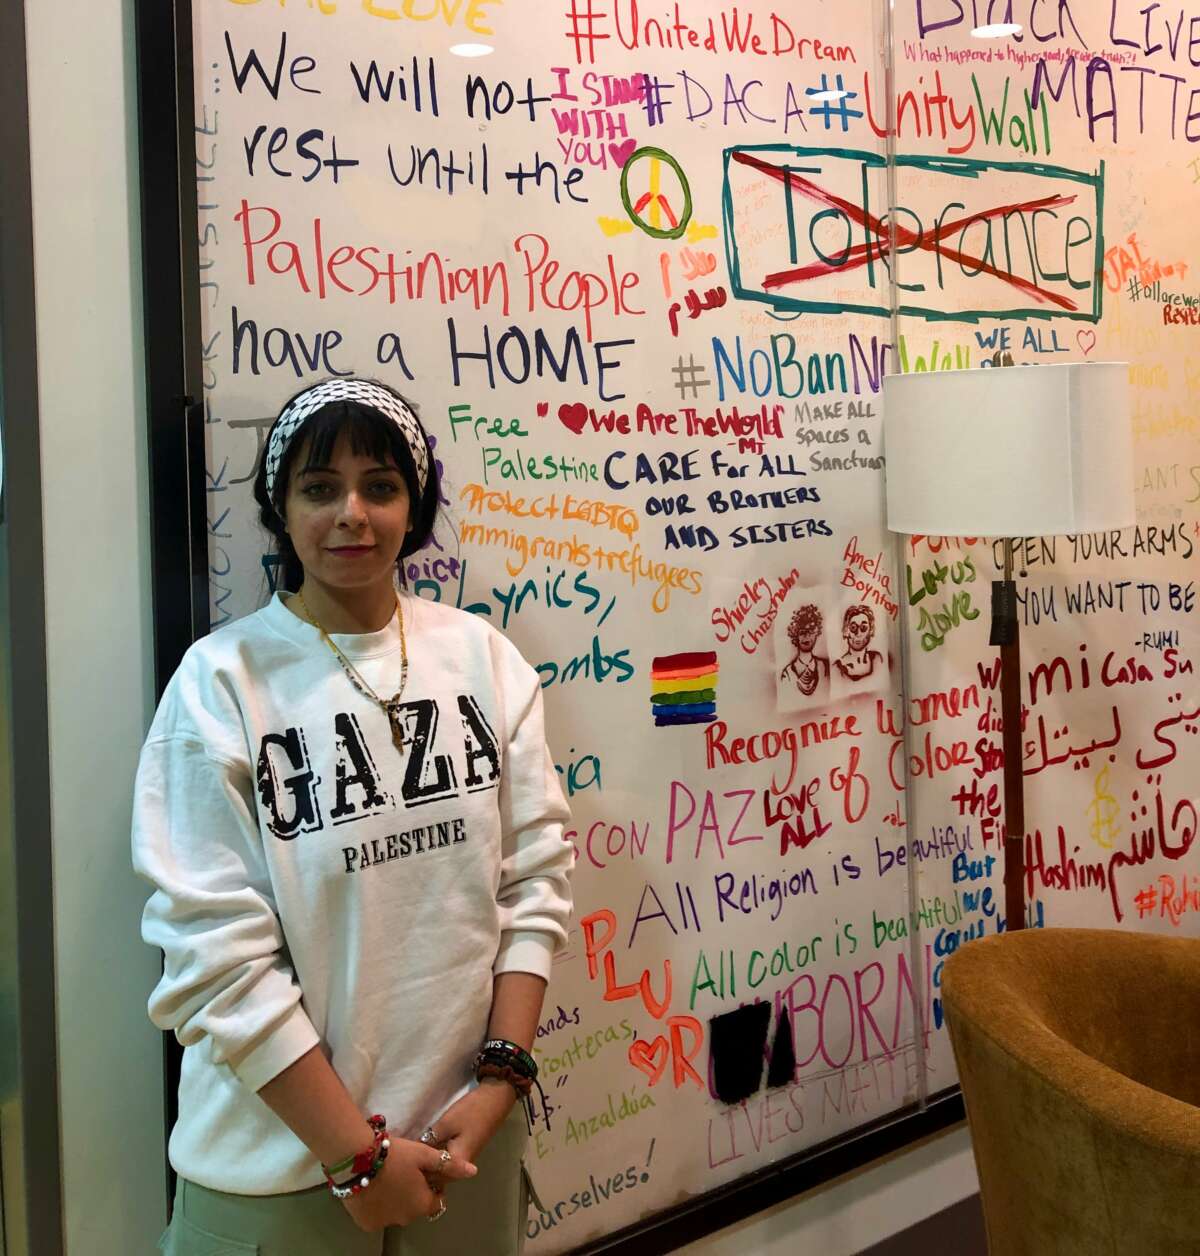 Intimaa Salama, in a gray sweatshirt that reads "GAZA", stands in front of a white board upon which many drawings and words are written.